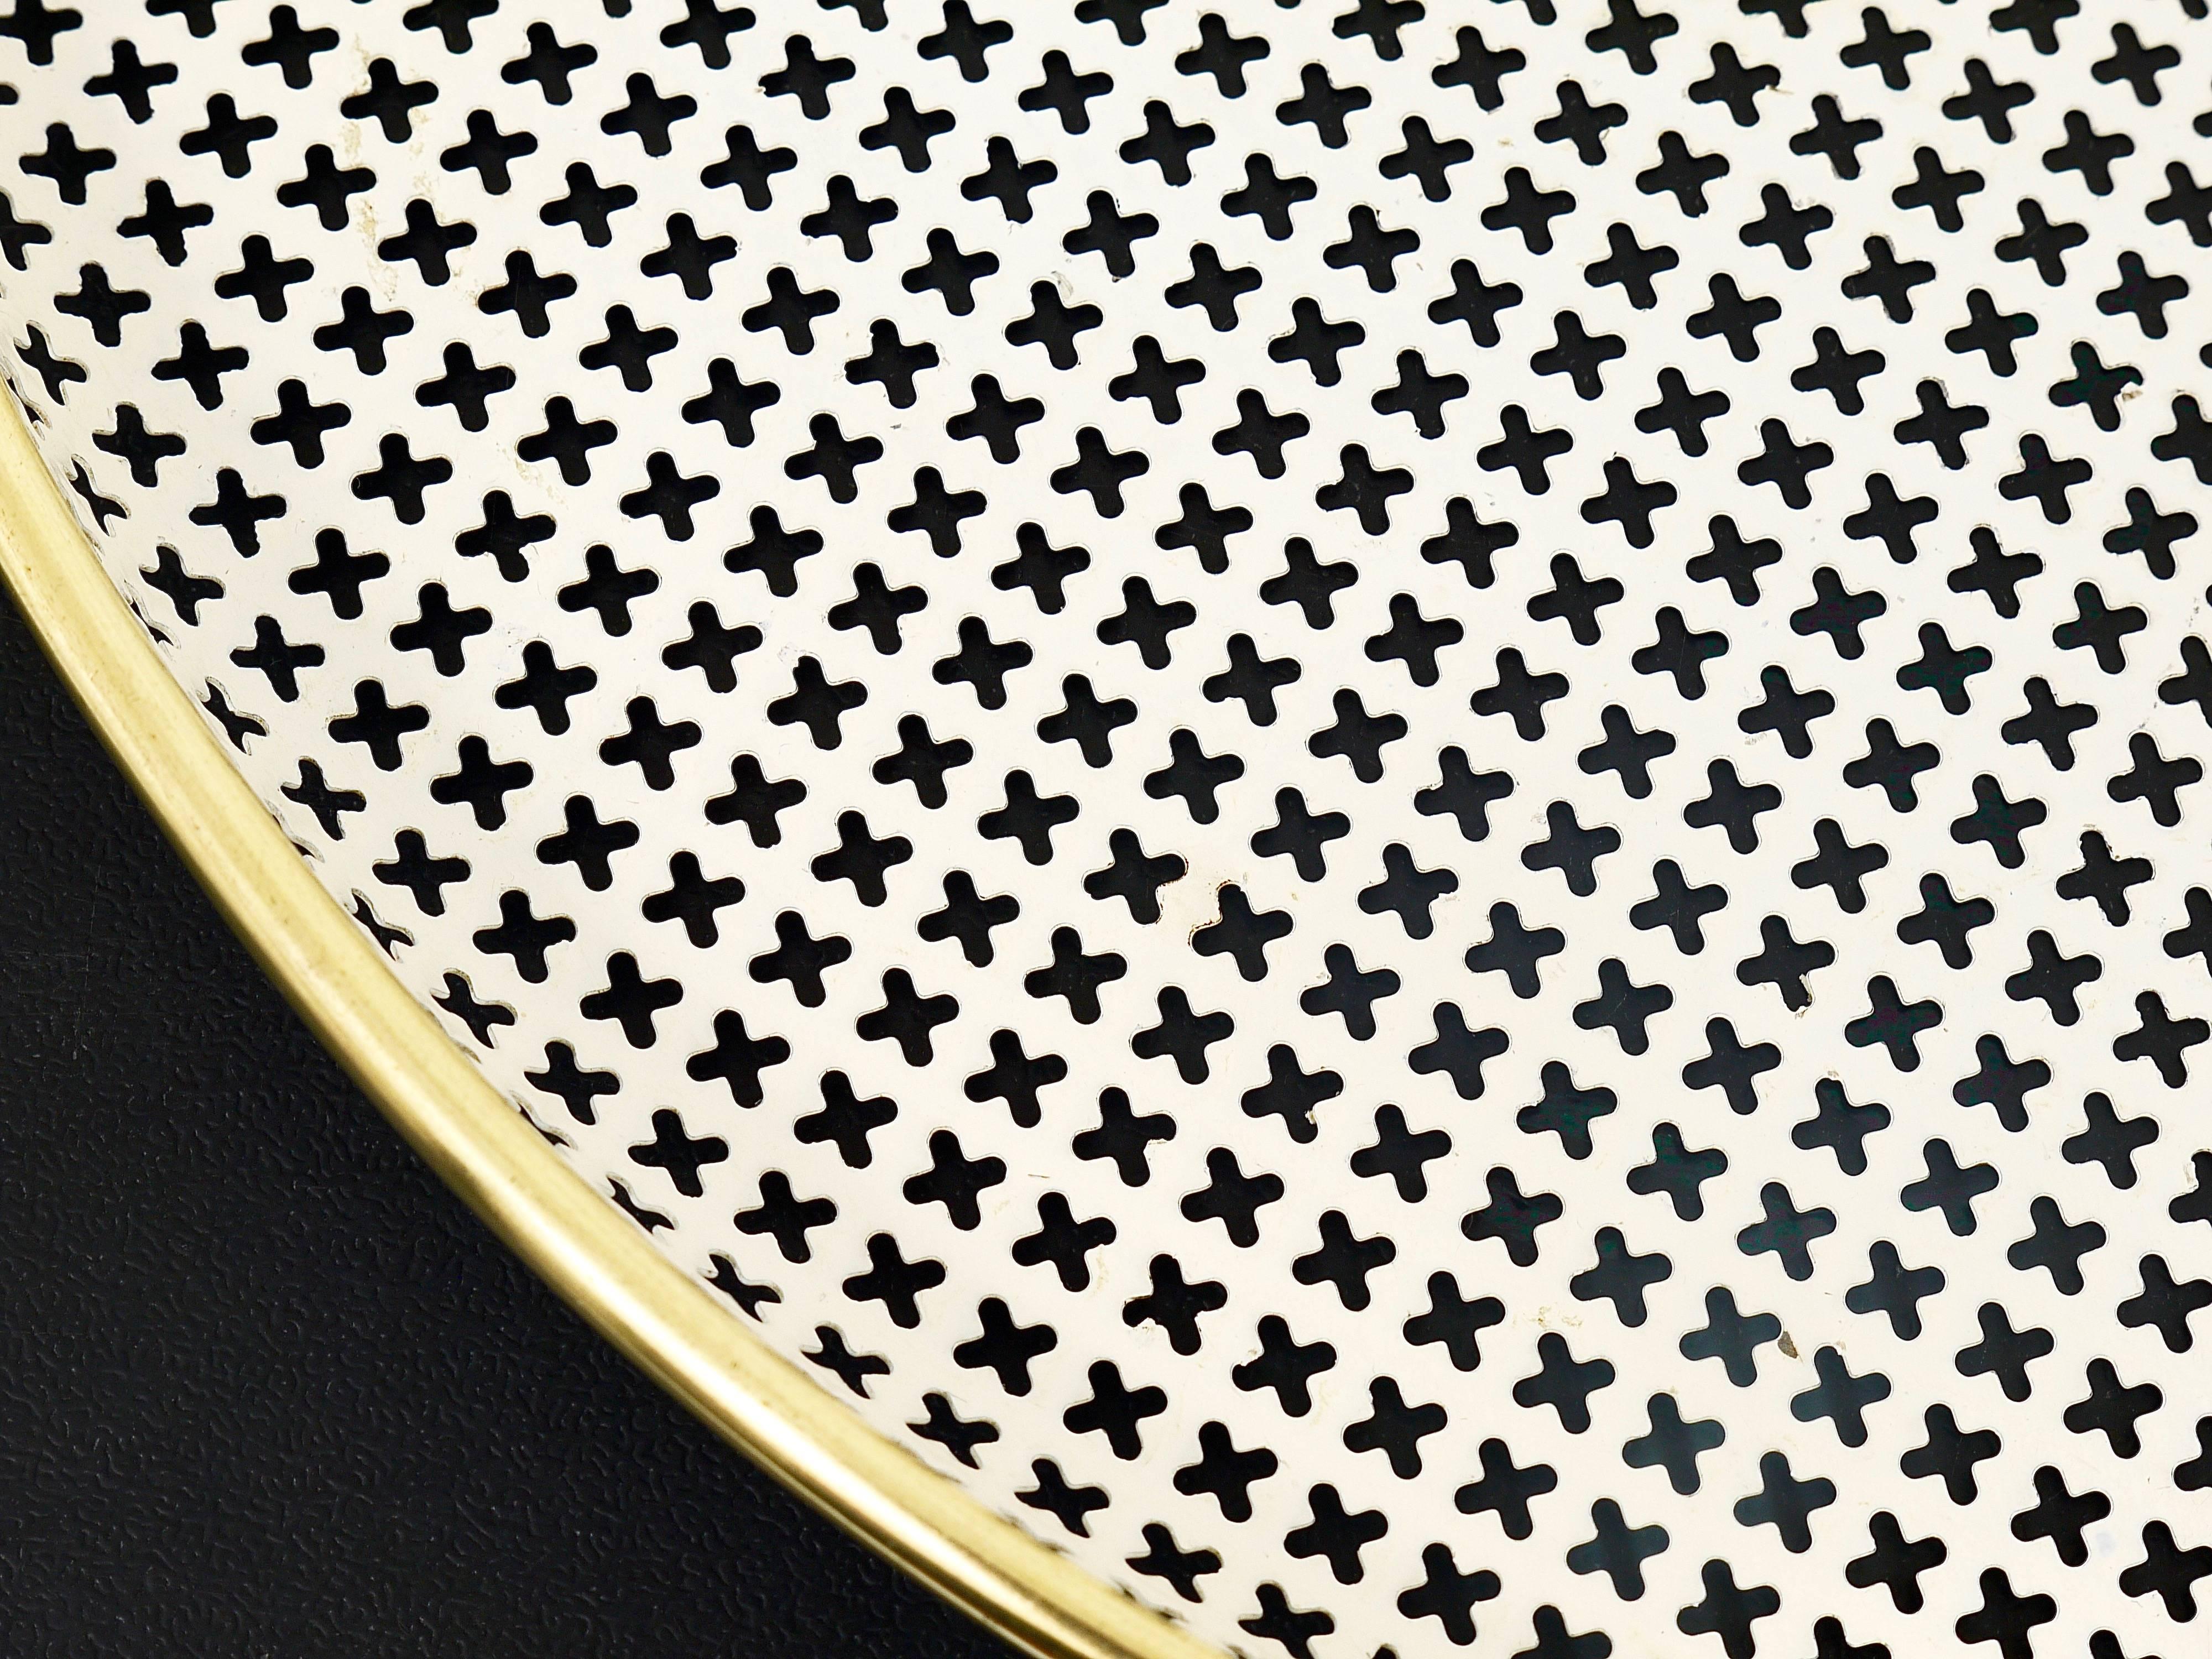 A round modernist serving tray, made of white perforated metal with a brass frame. Manufactured in the 1950s by Muenchner Werkstaetten, Germany. In excellent condition.